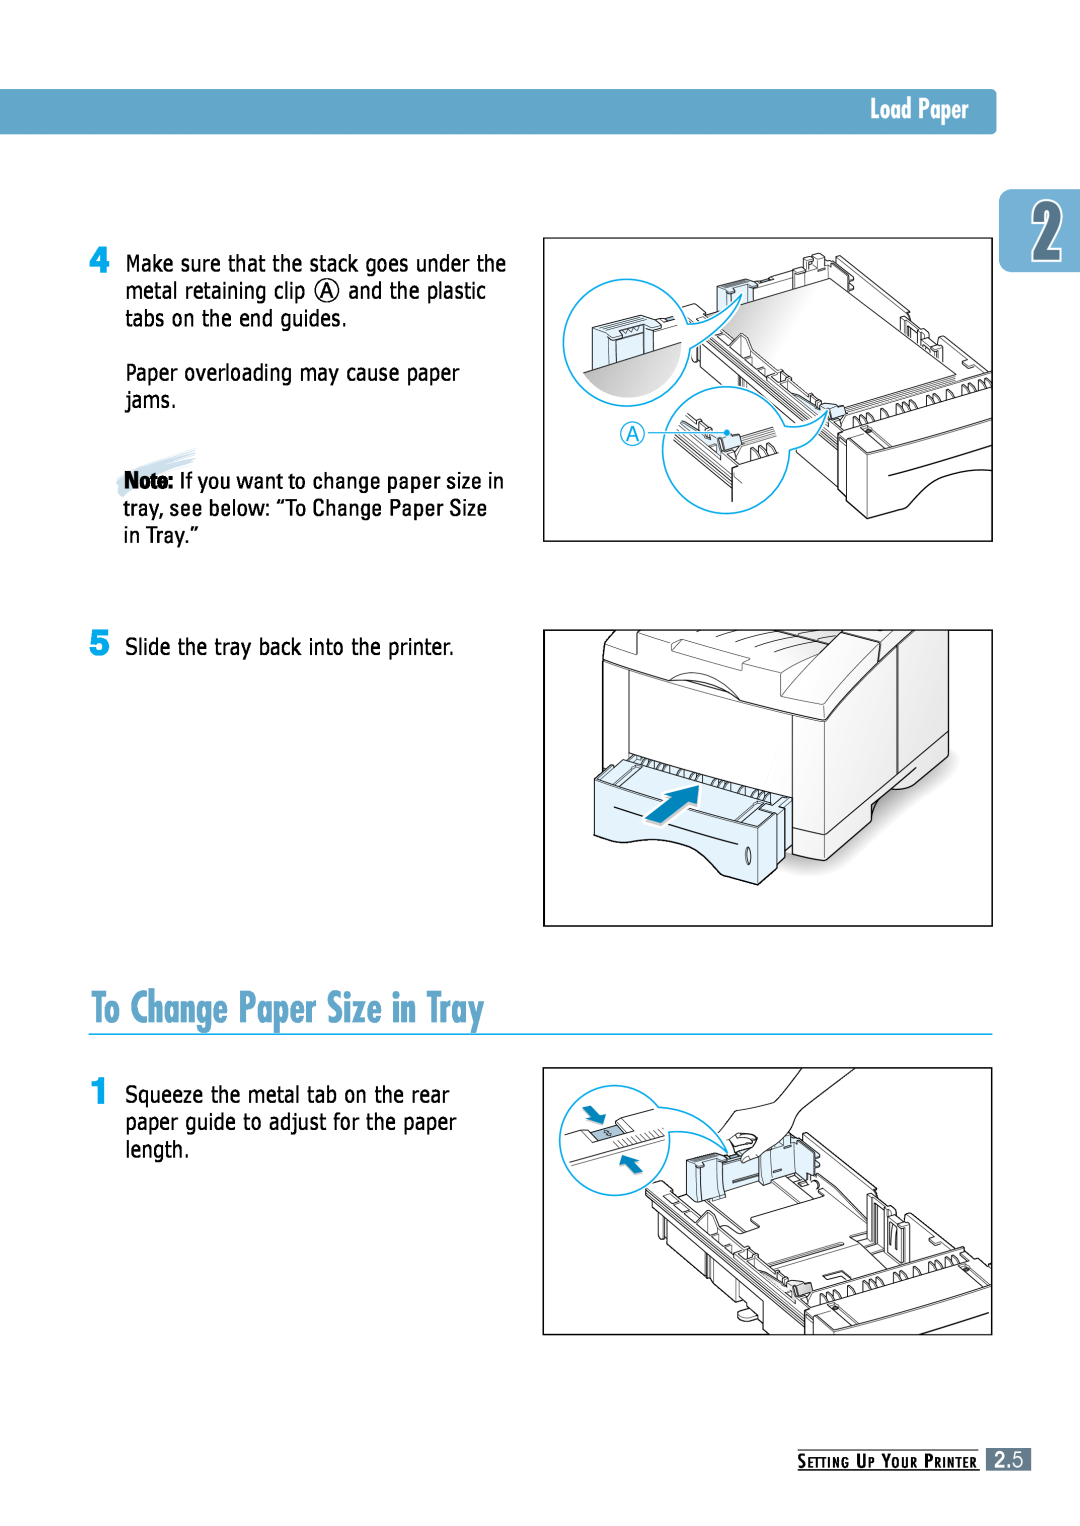 Samsung ML-6060N To Change Paper Size in Tray, Load Paper, Paper overloading may cause paper jams, Setting Up Your Printer 